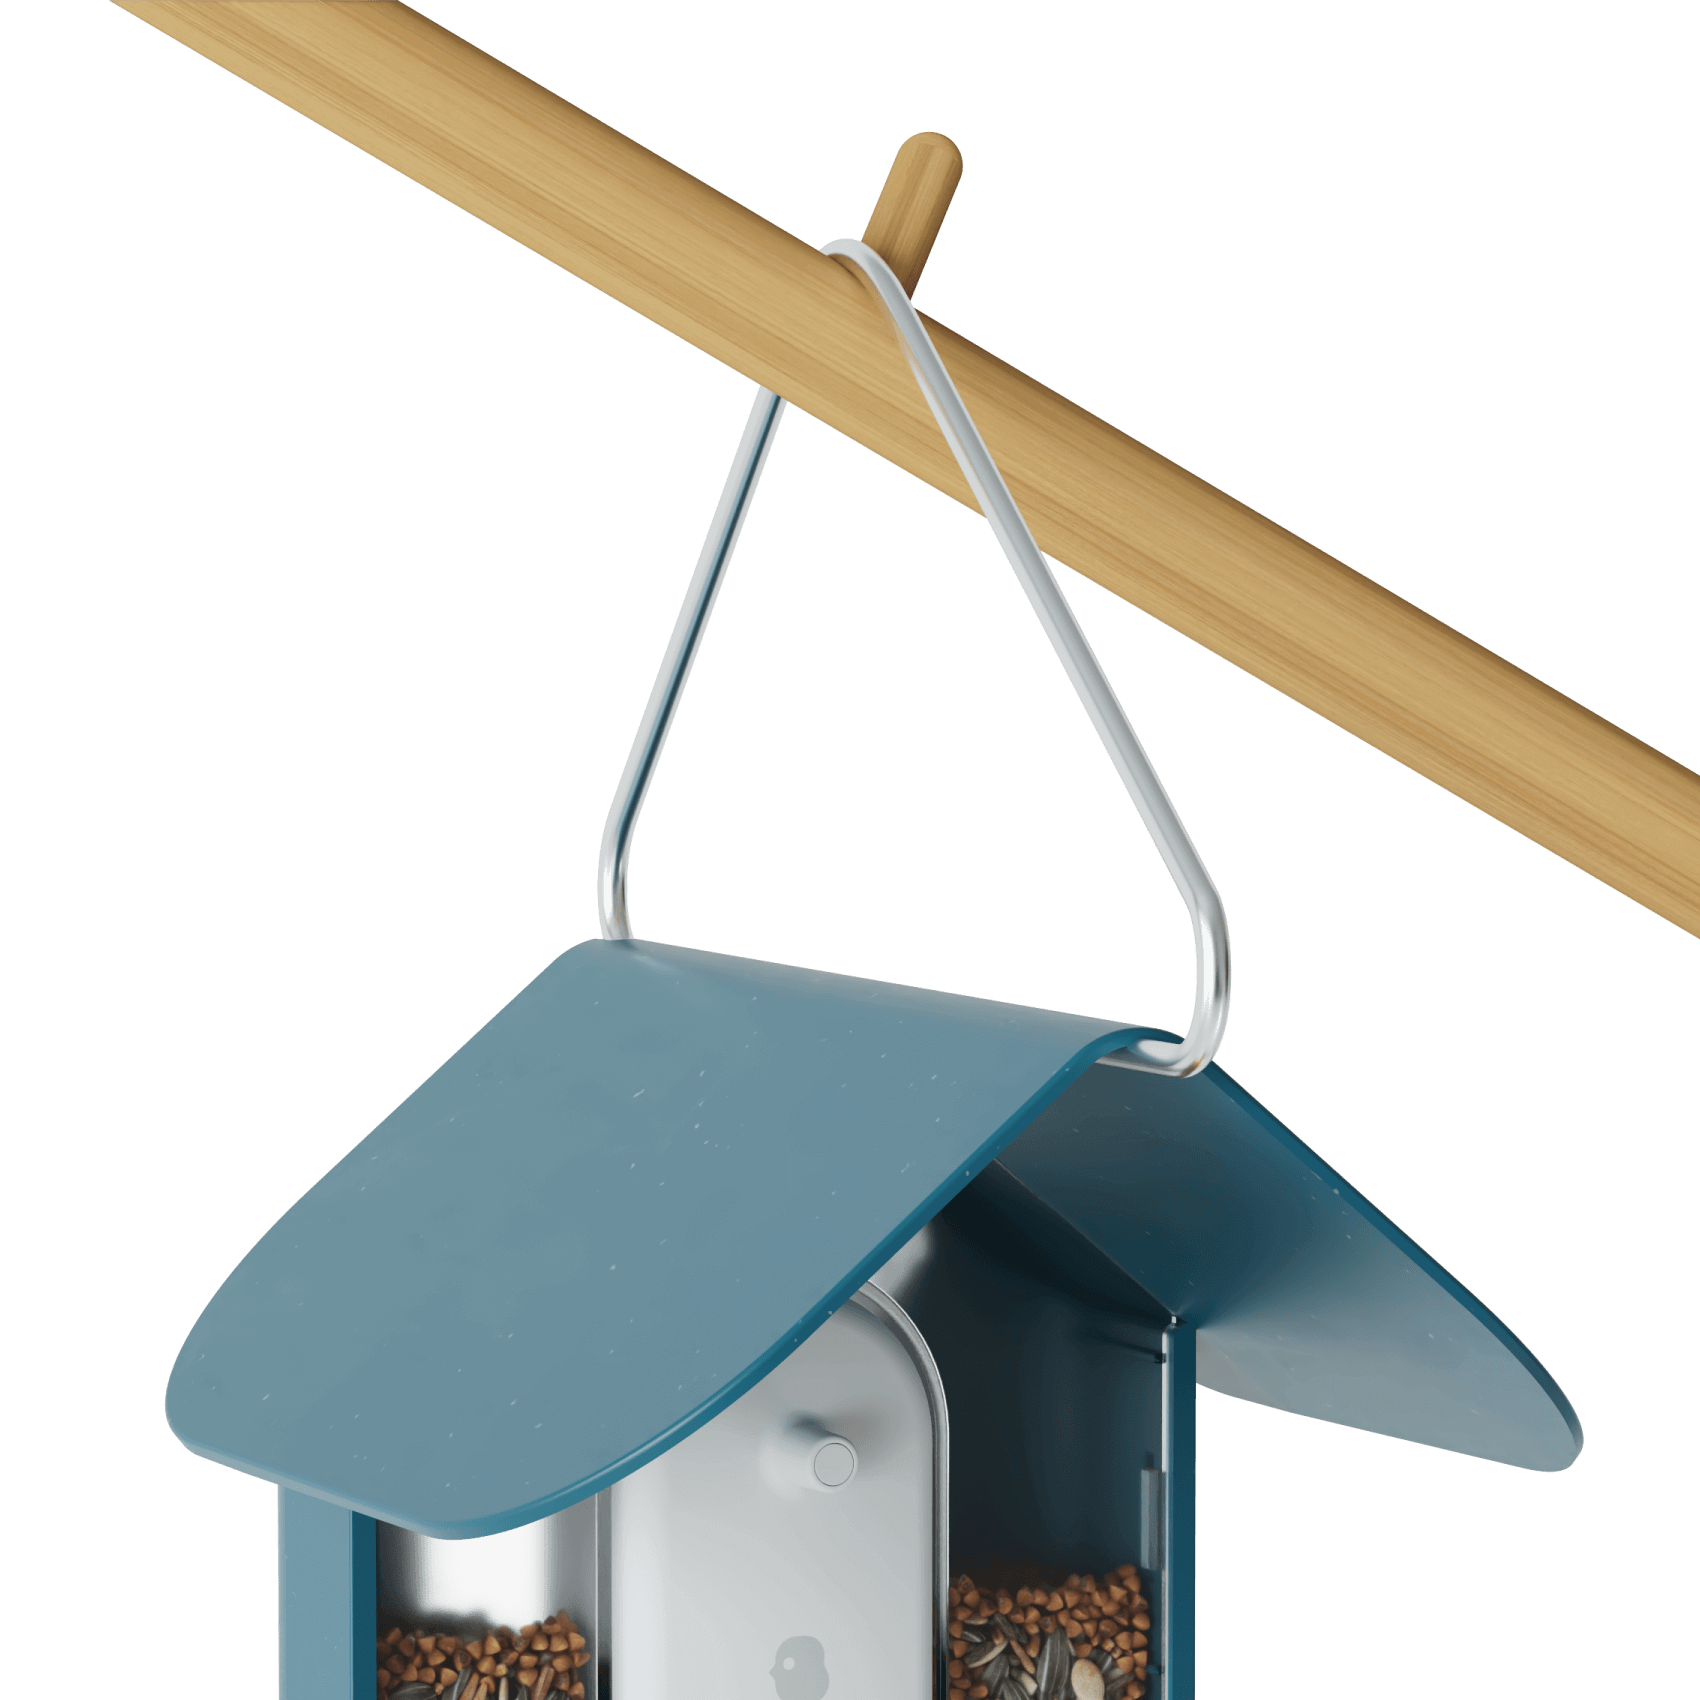 Bird Buddy Review — This Bird Feeder is My Favorite Product of the